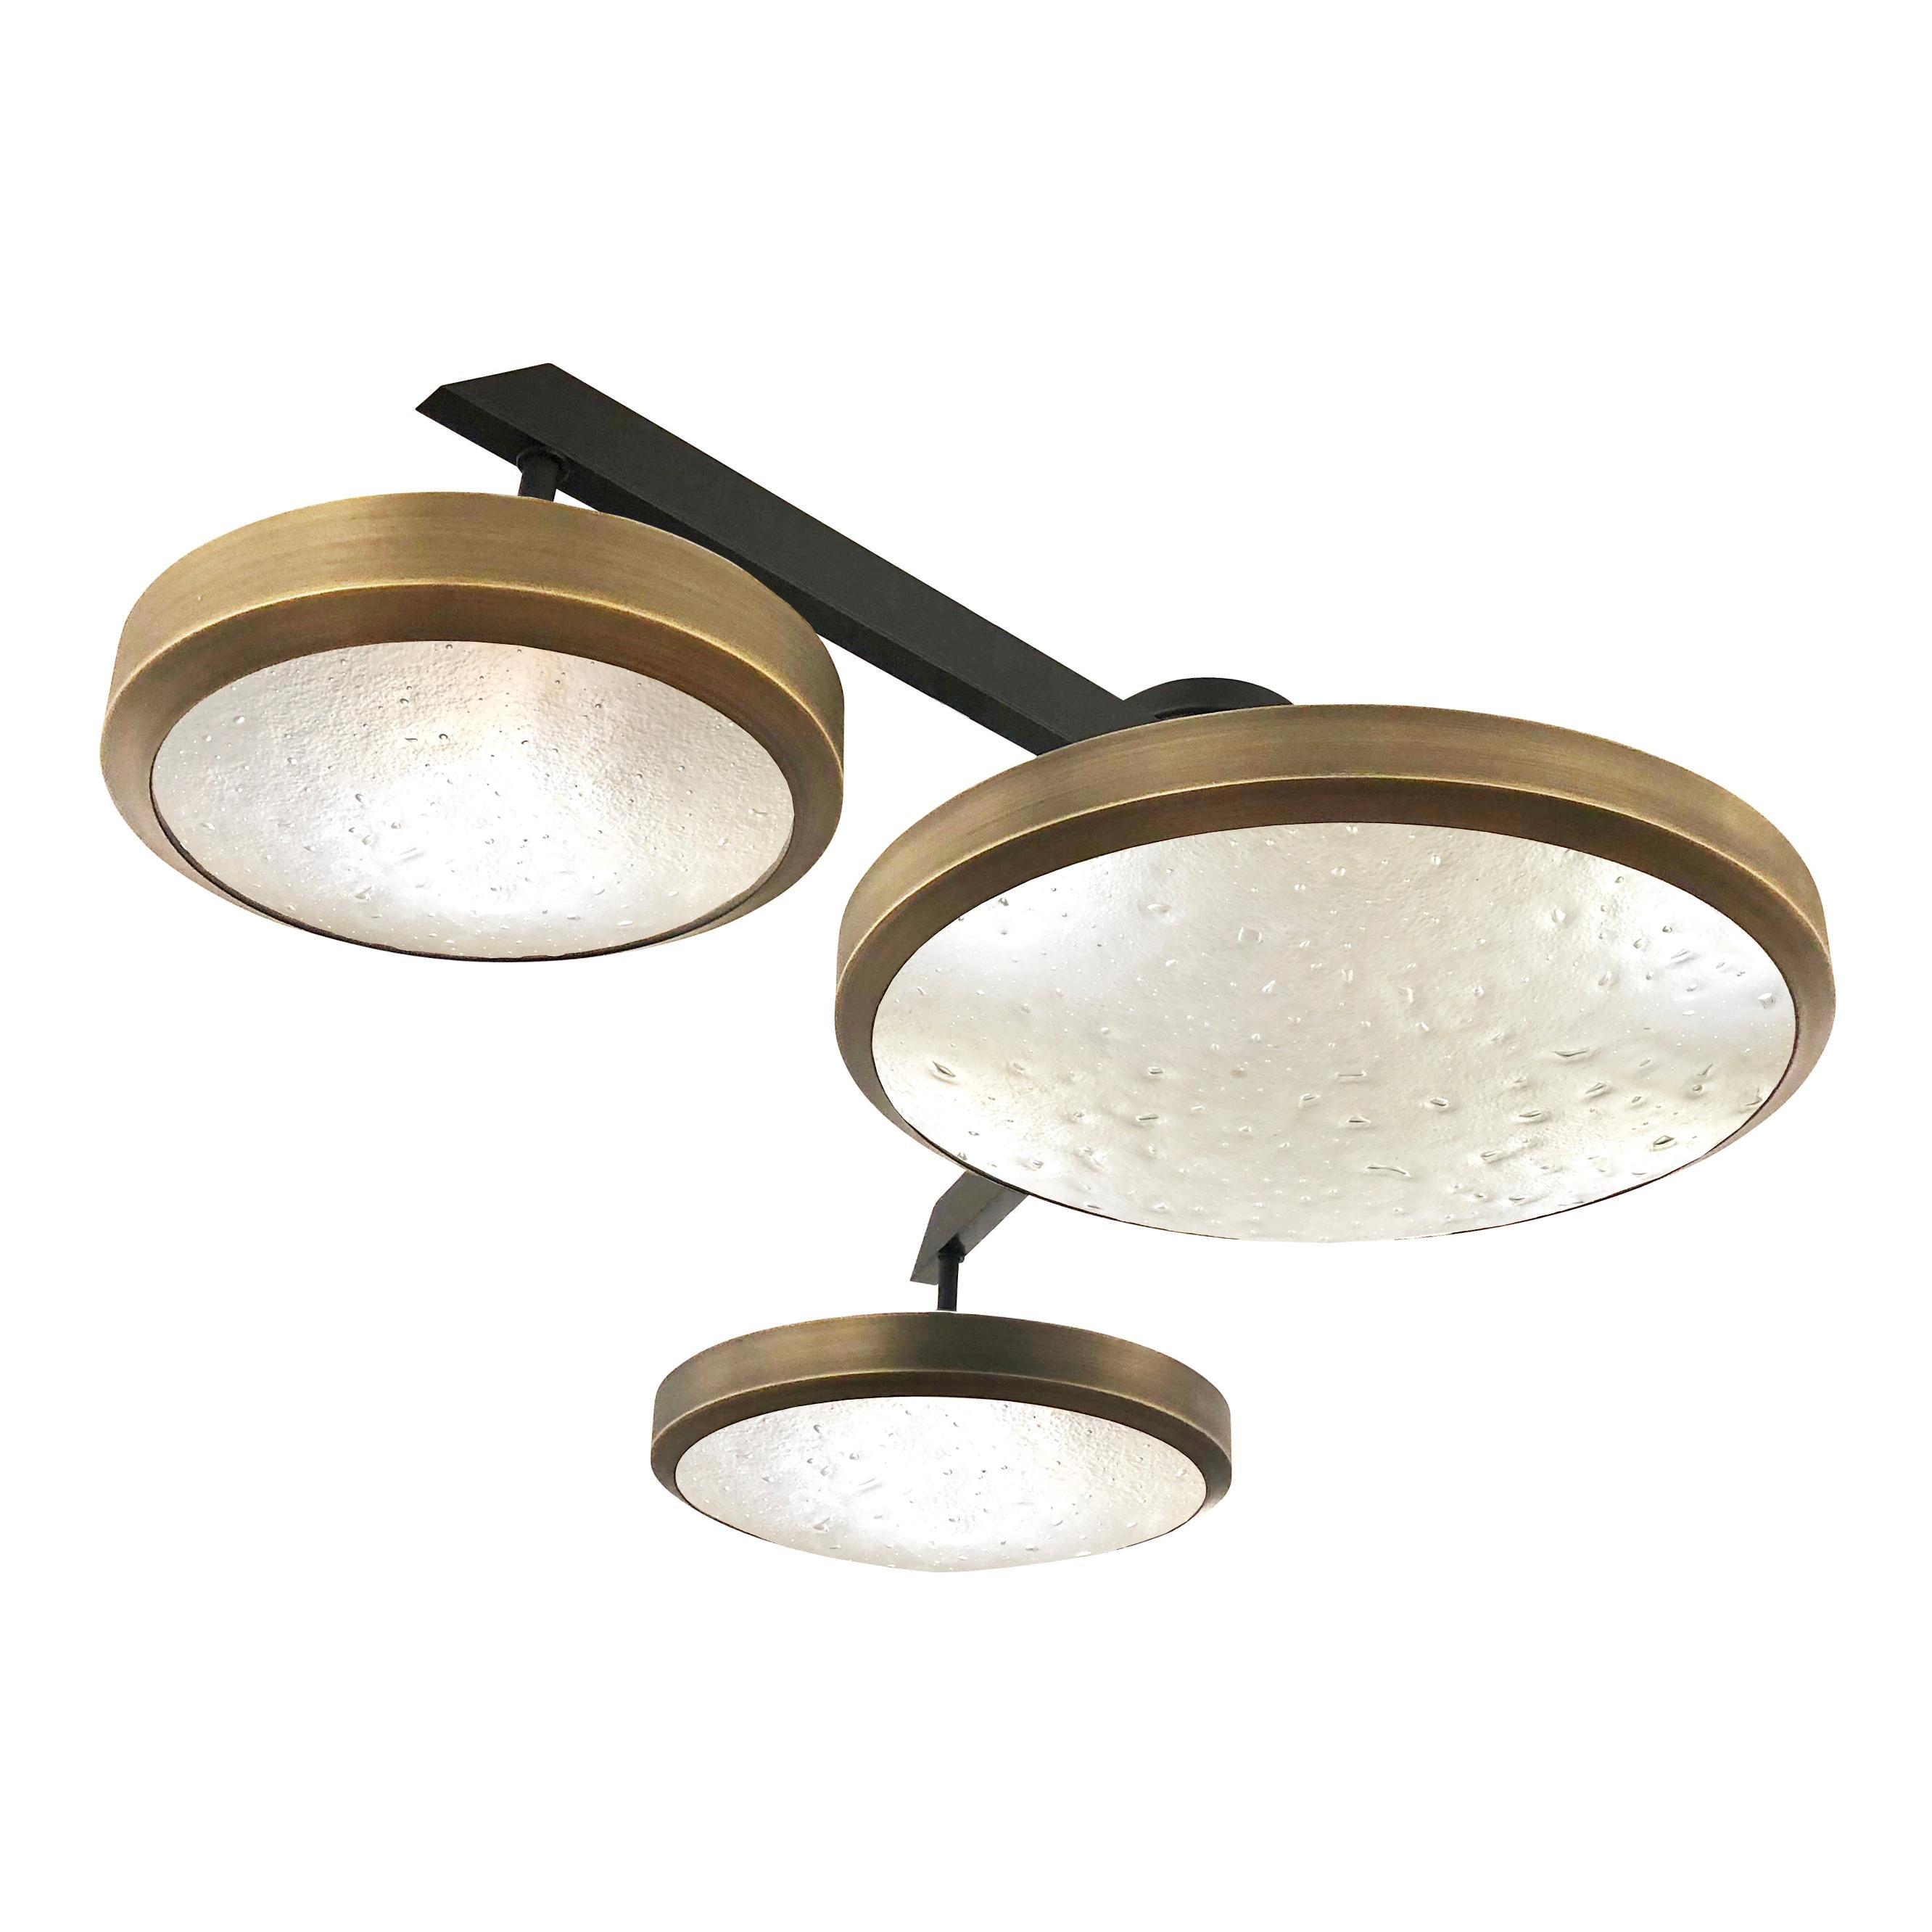 Zeta Ceiling Light by Gaspare Asaro- Two Tone Finish